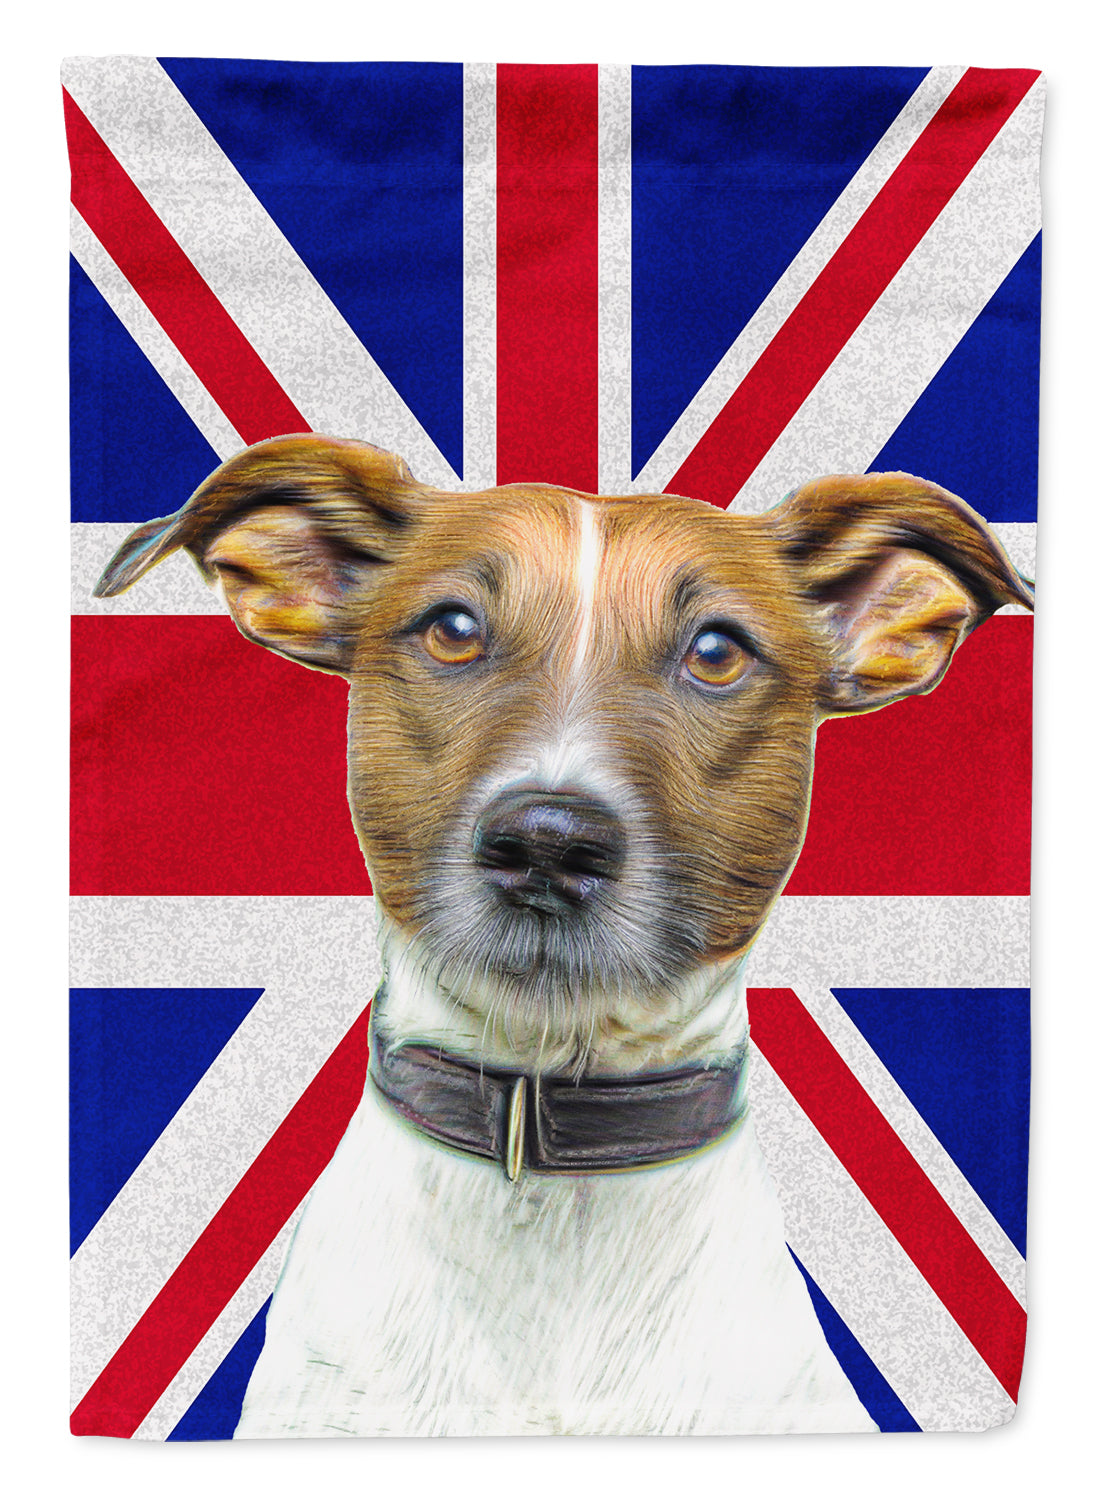 Jack Russell Terrier with English Union Jack British Flag Flag Garden Size KJ1162GF.